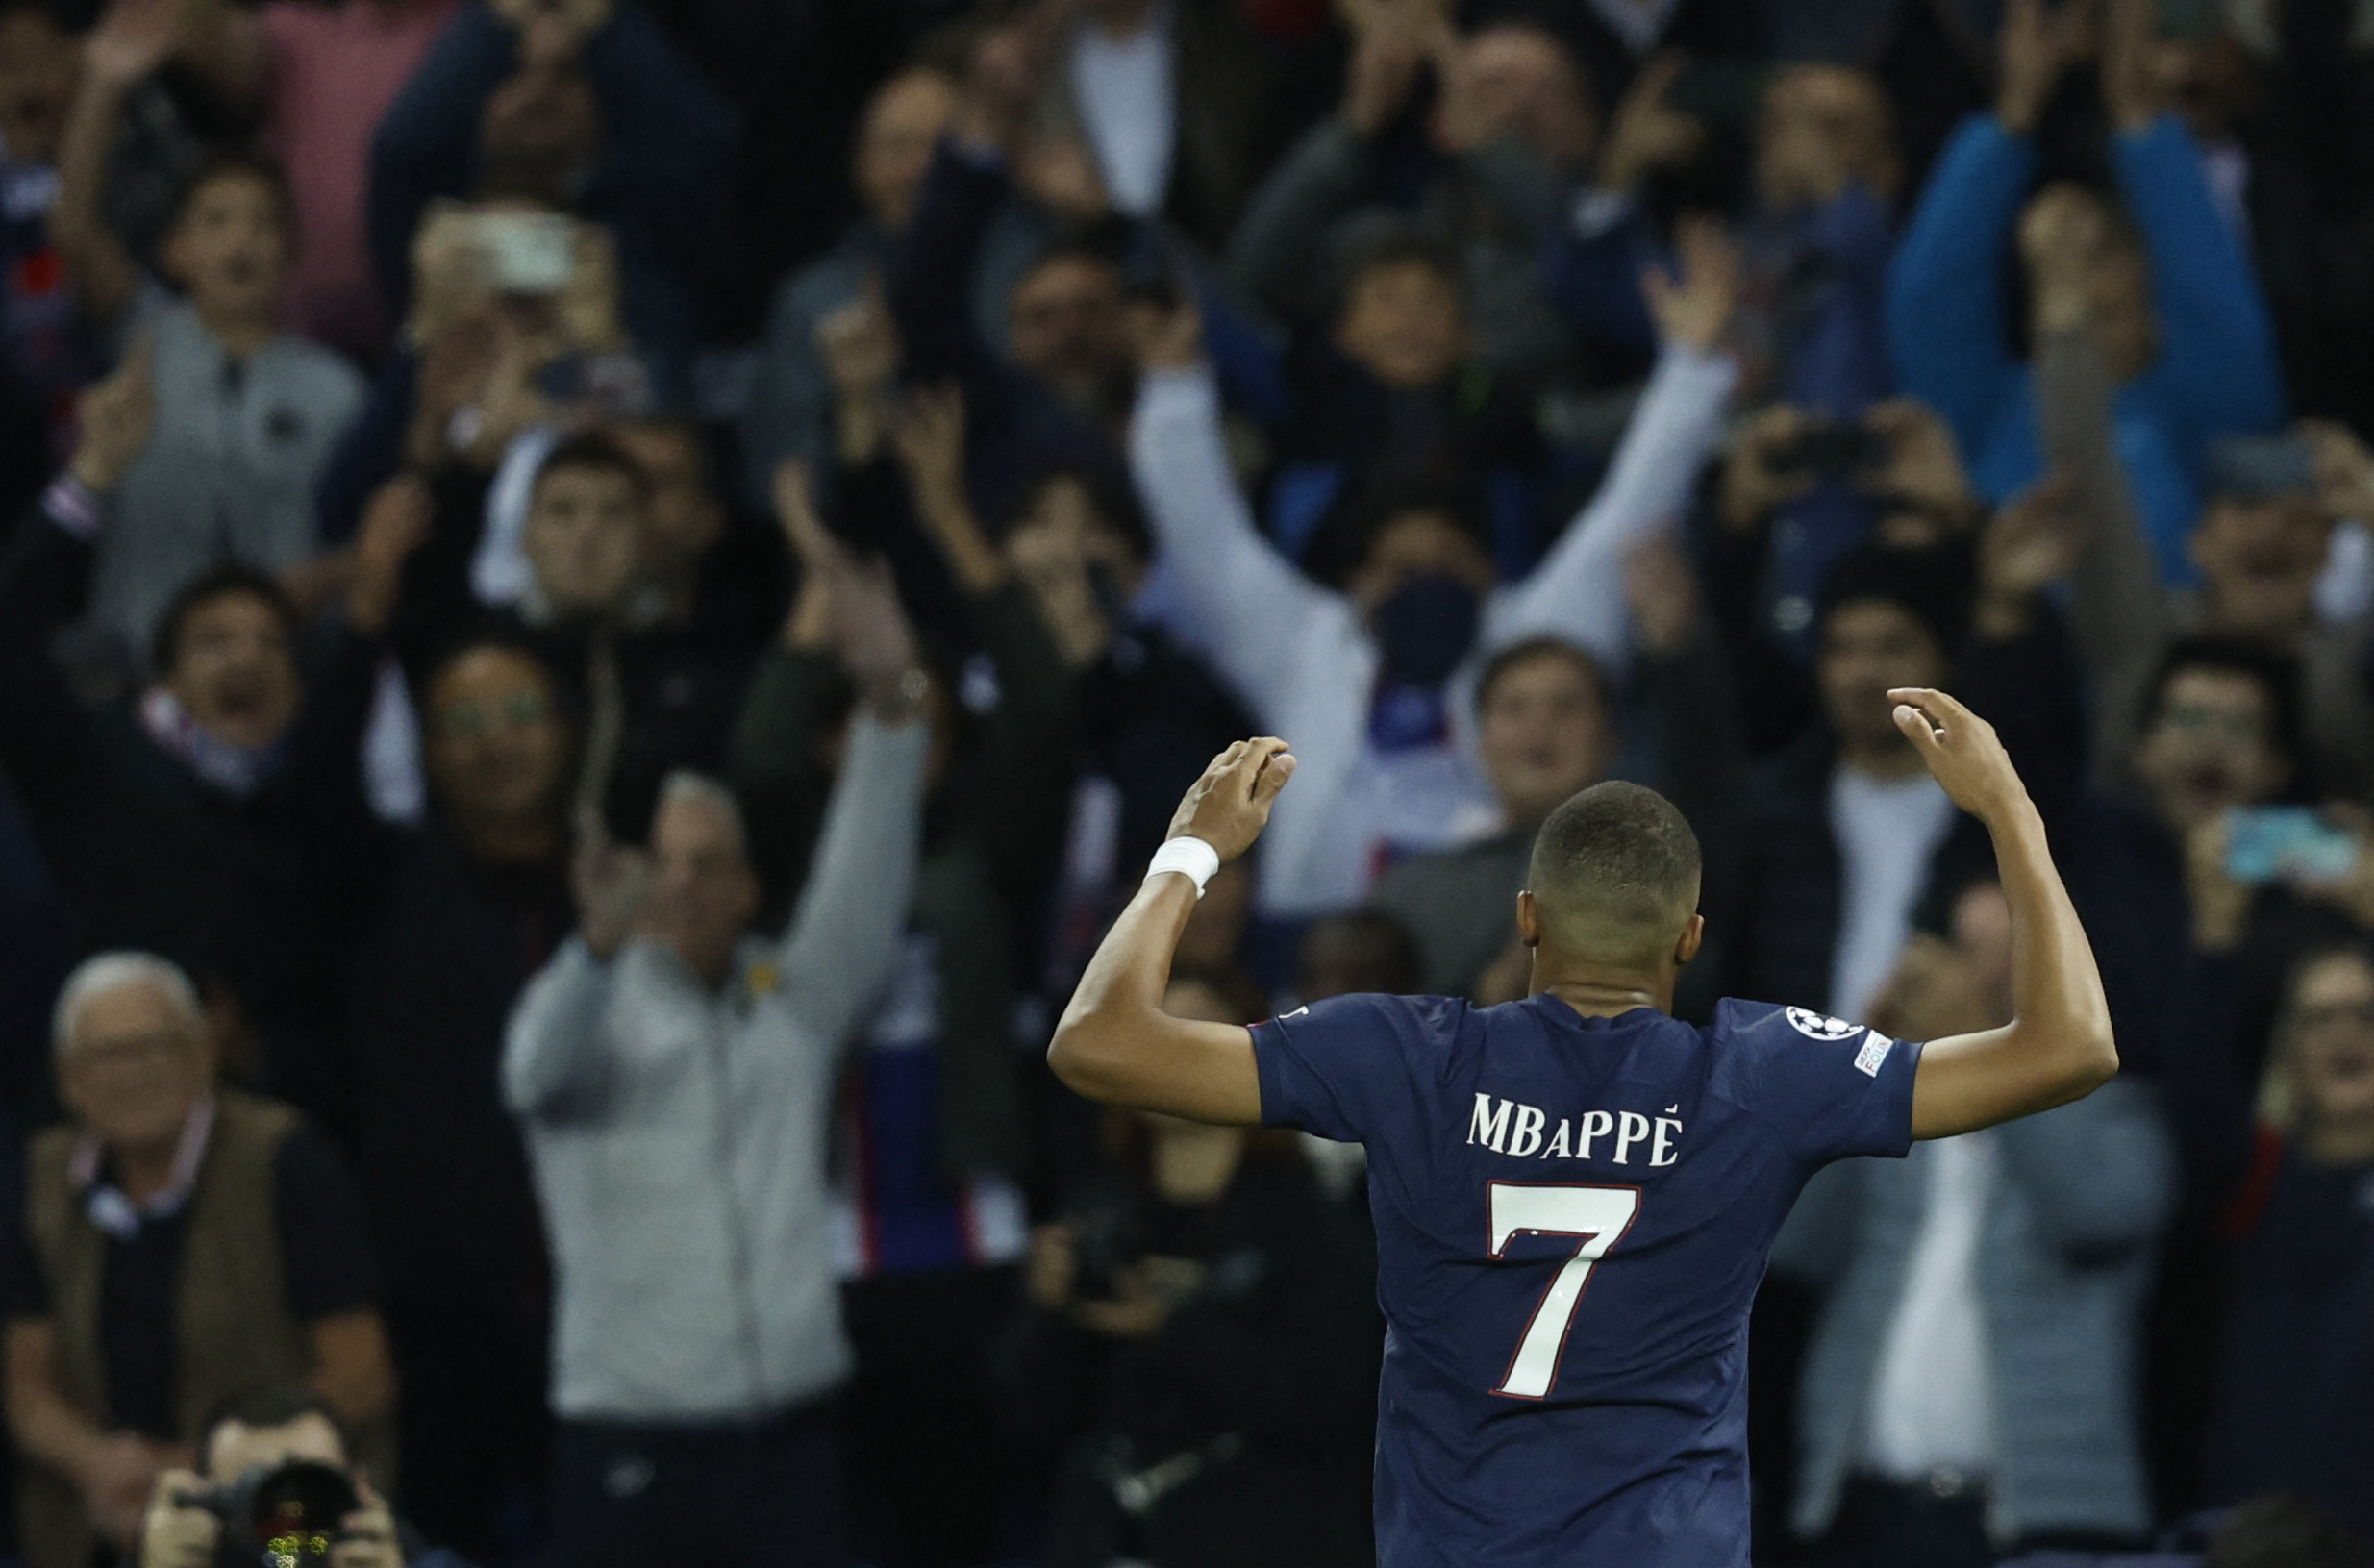 It was recently leaked that Mbappé would earn 630 million euros (Reuters)